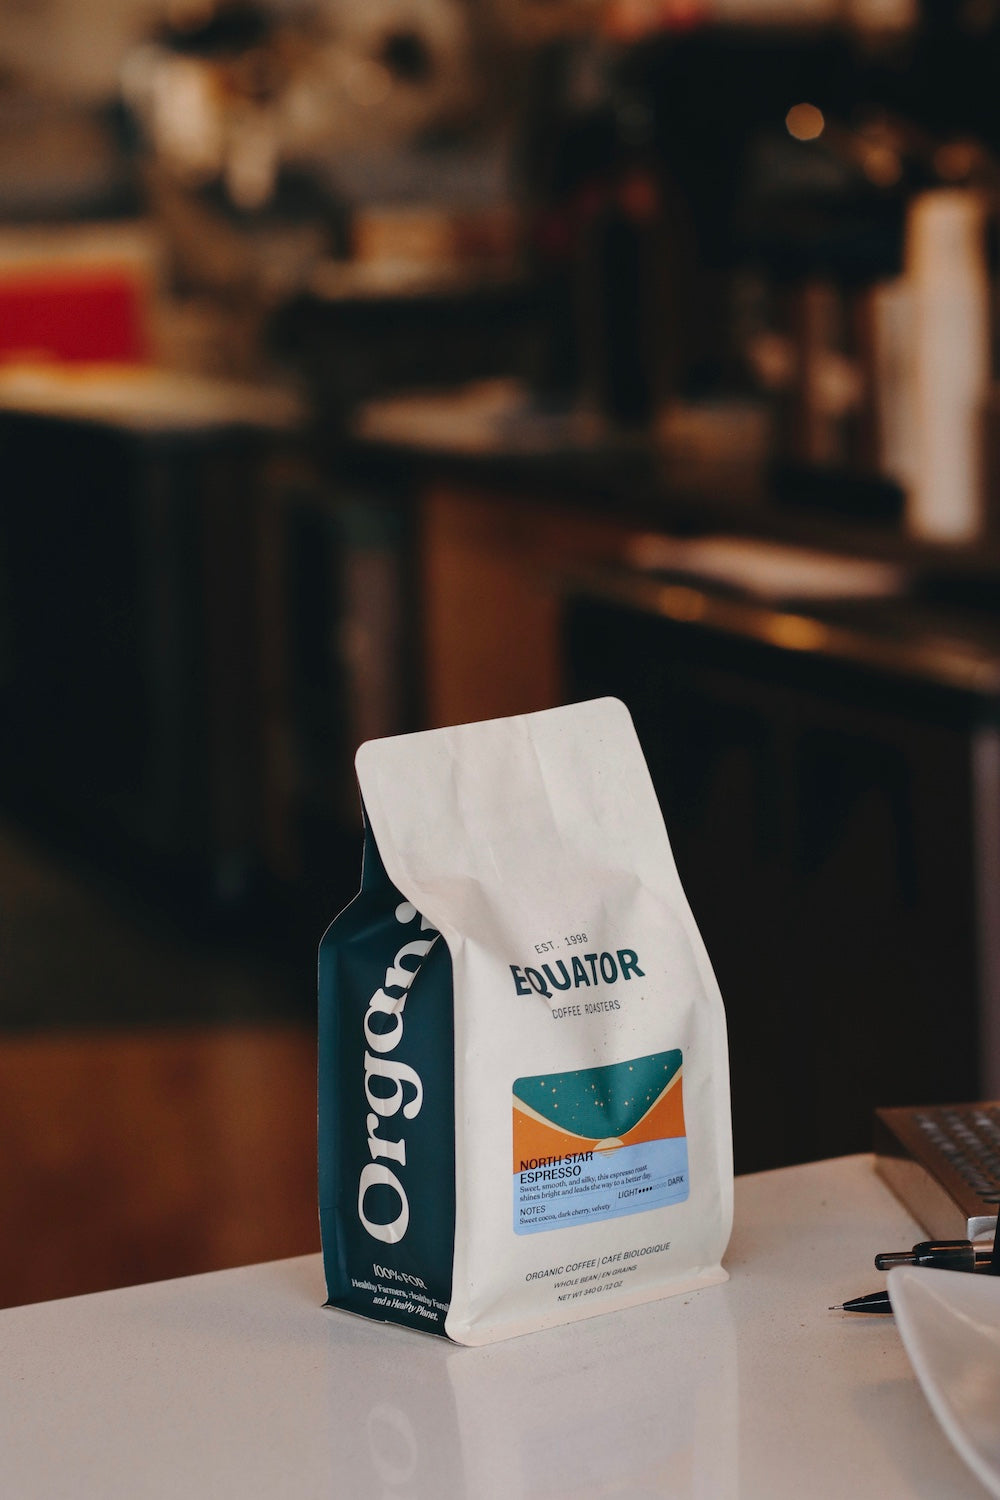 340g bag of North Star Espresso on a counter.